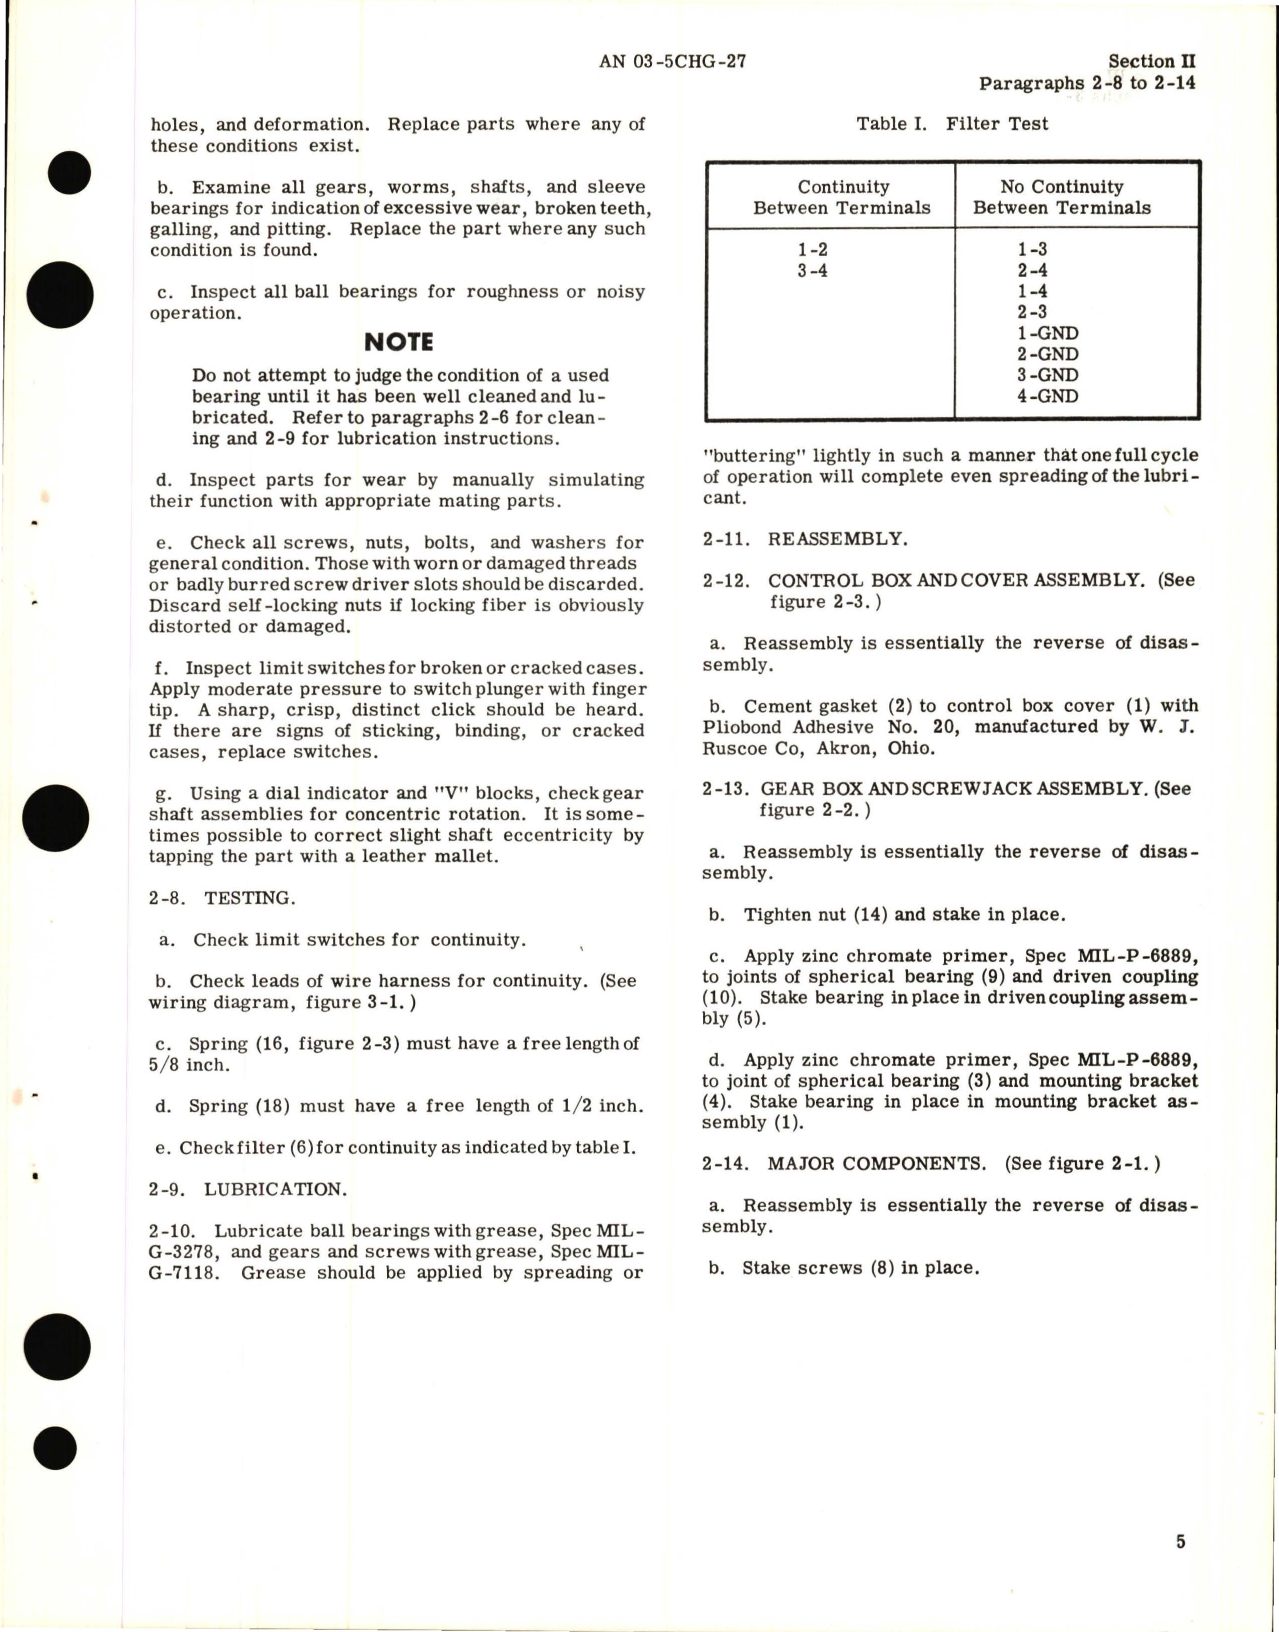 Sample page 7 from AirCorps Library document: Overhaul Instructions for Lear Linear Actuator Assembly